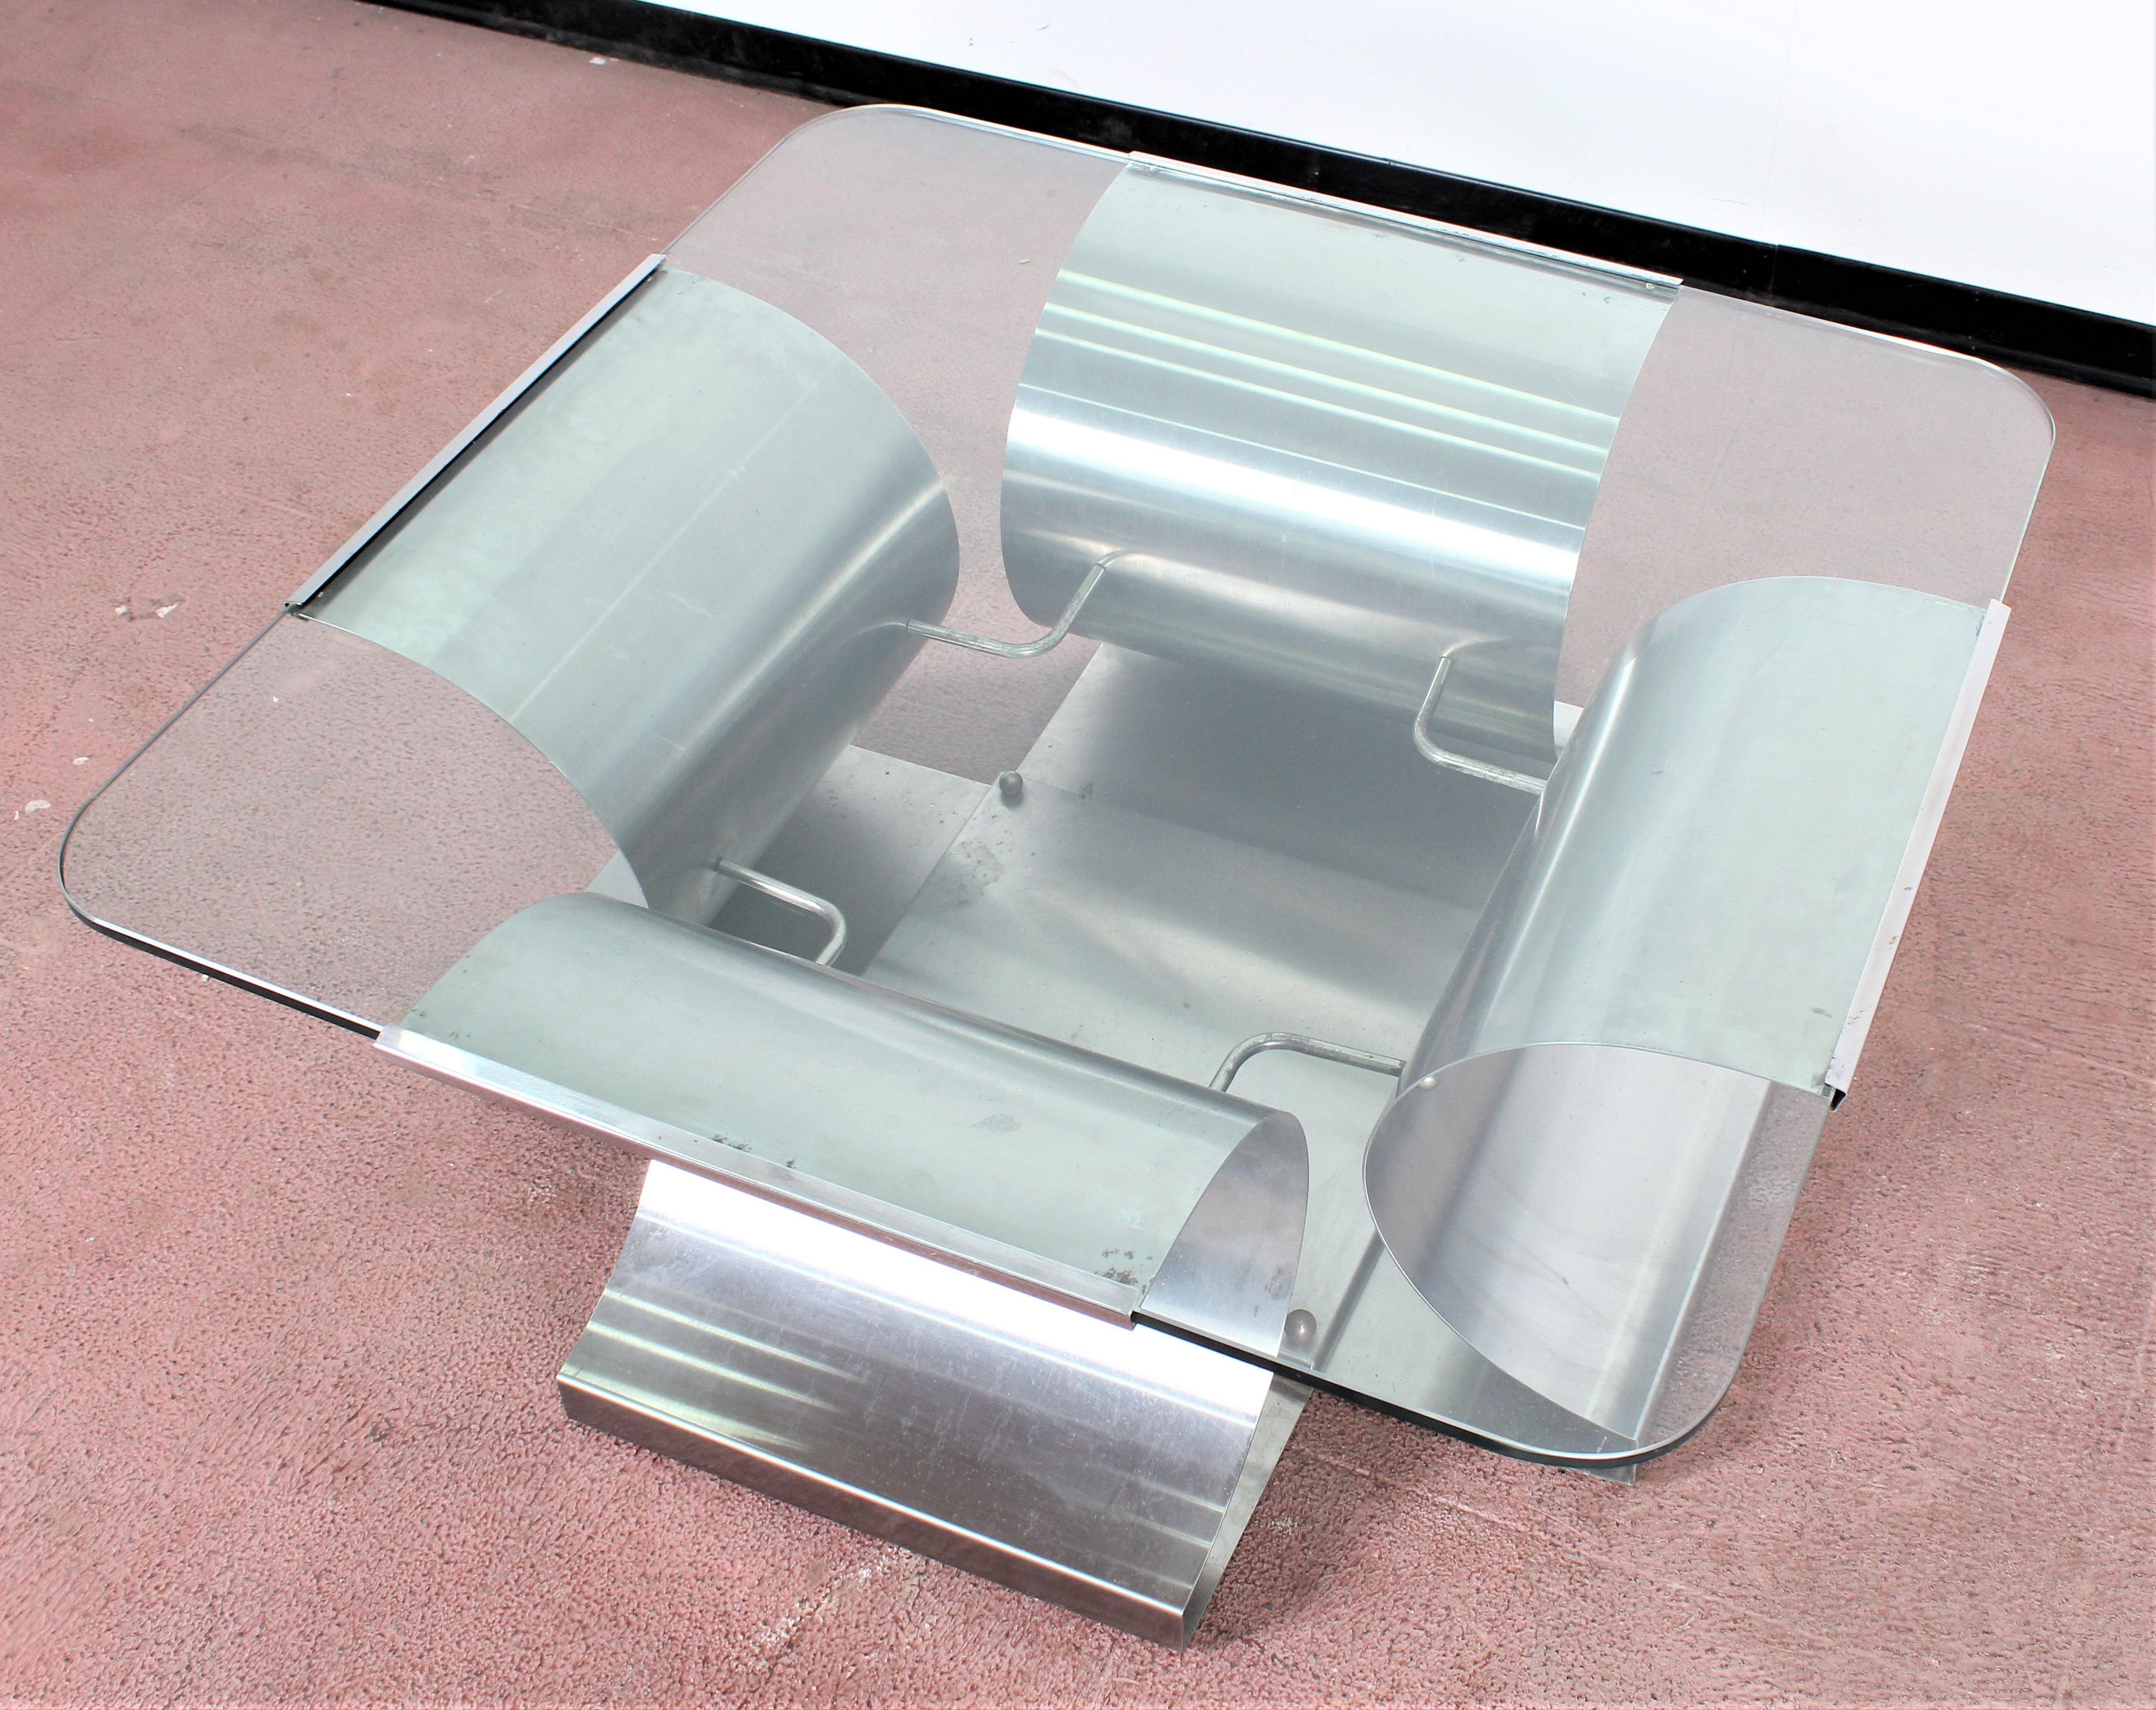 Beautifull Square brushed steel coffee table with glass top designed by François Monnet for Kappa. Manufactured in the 1970s.
Wear consistent with age and use.